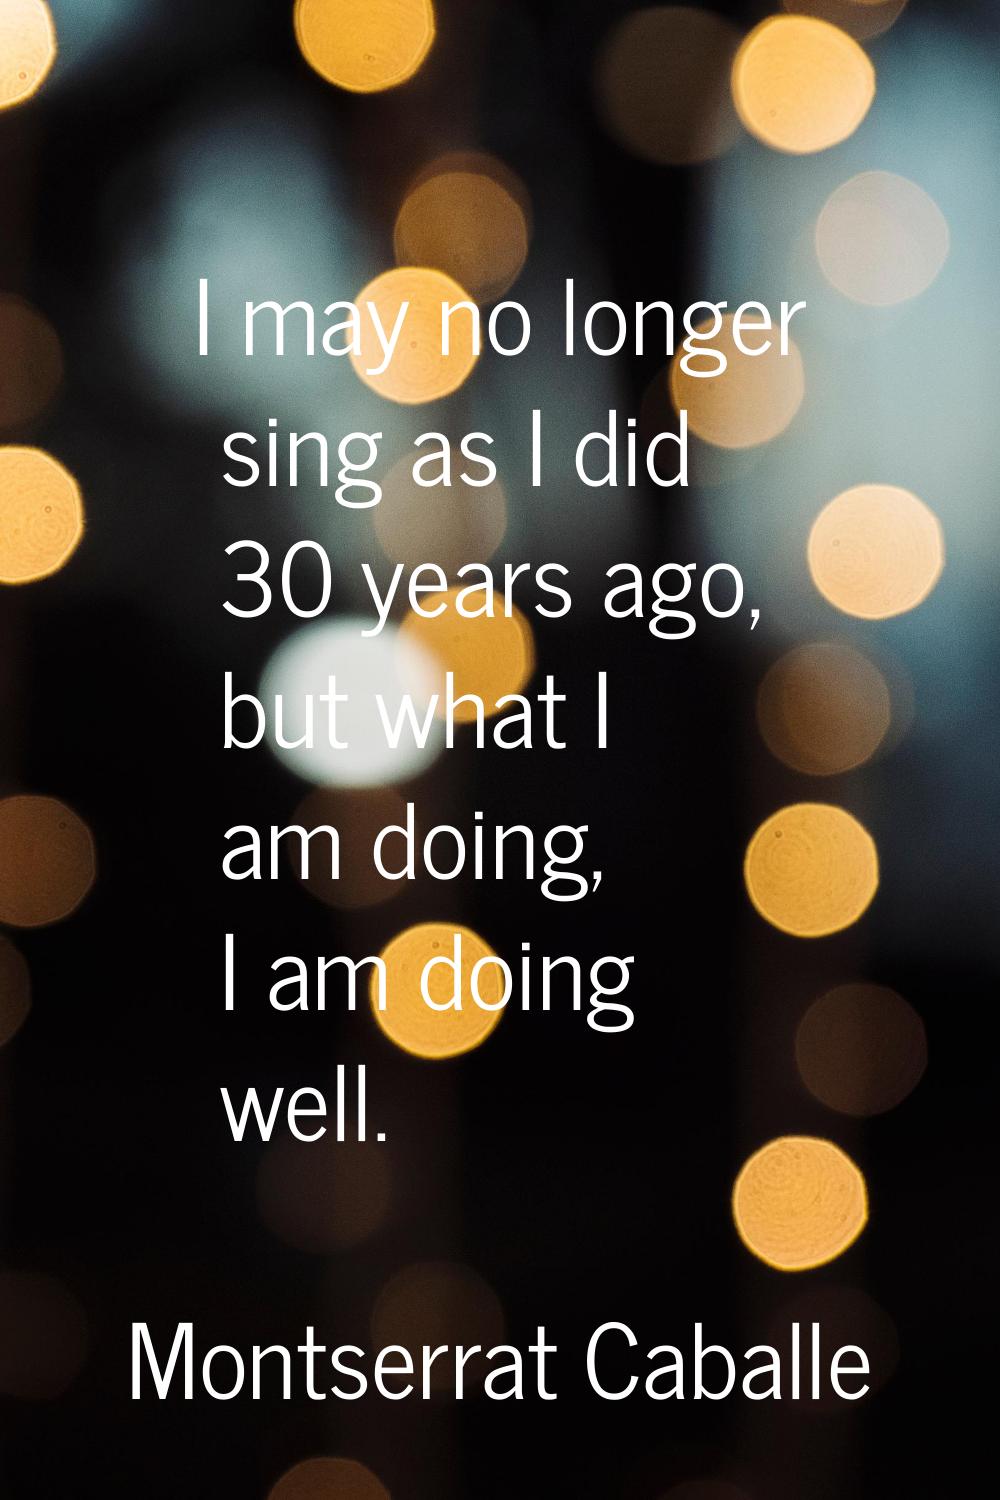 I may no longer sing as I did 30 years ago, but what I am doing, I am doing well.